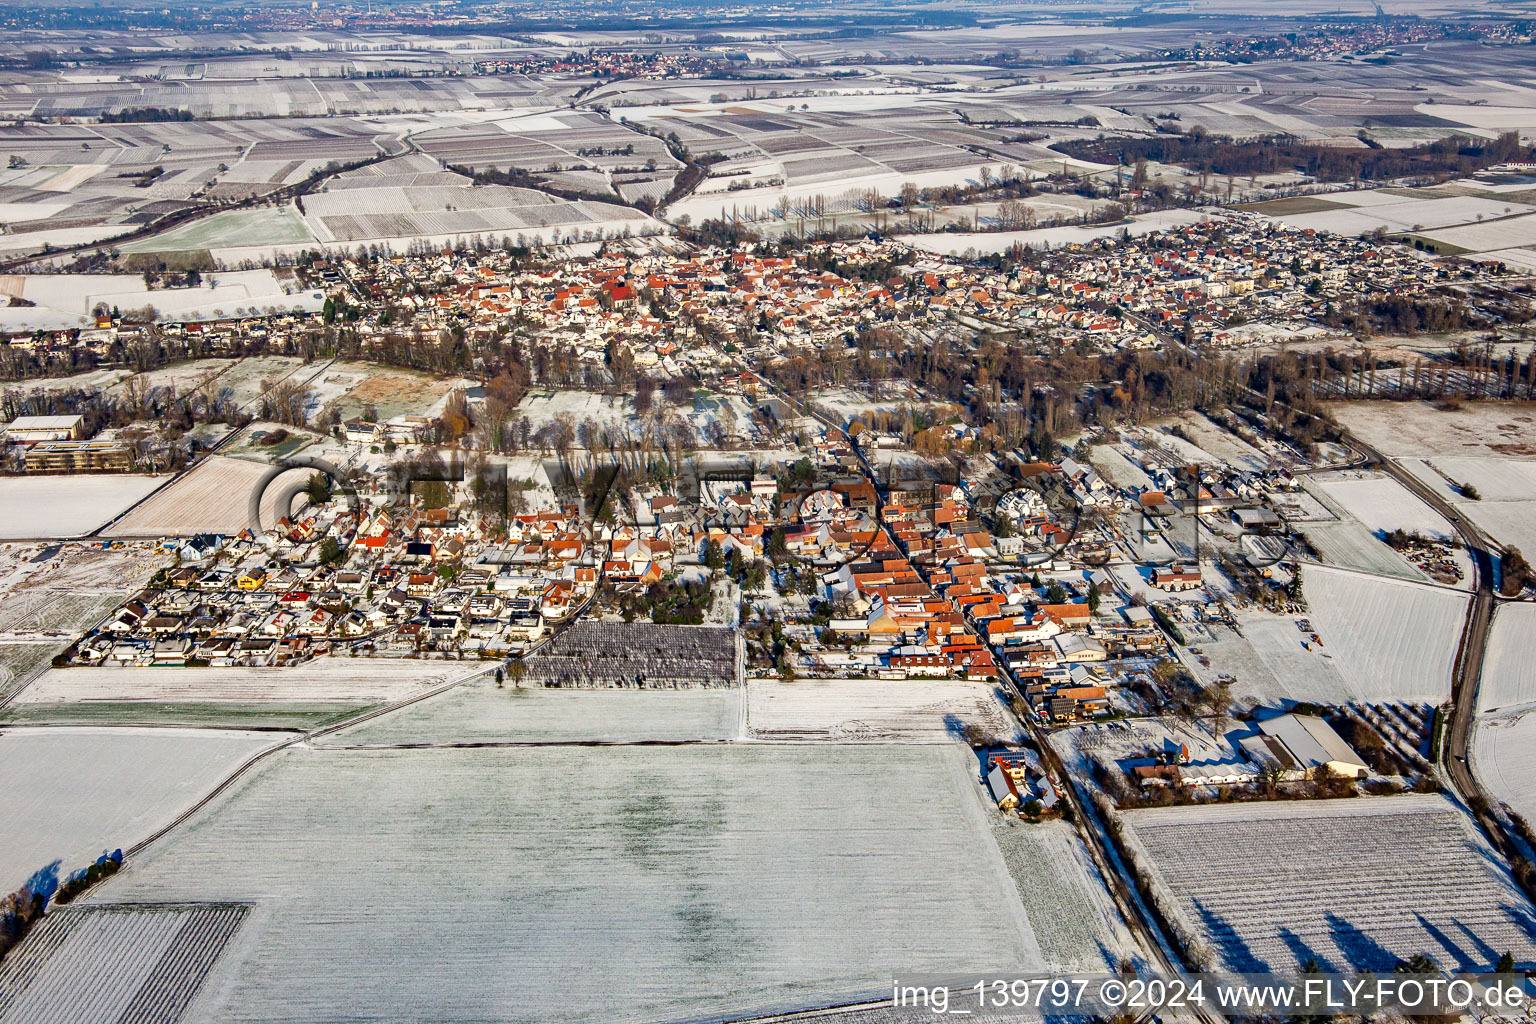 Aerial view of From the south in the snow in winter in the district Mühlhofen in Billigheim-Ingenheim in the state Rhineland-Palatinate, Germany